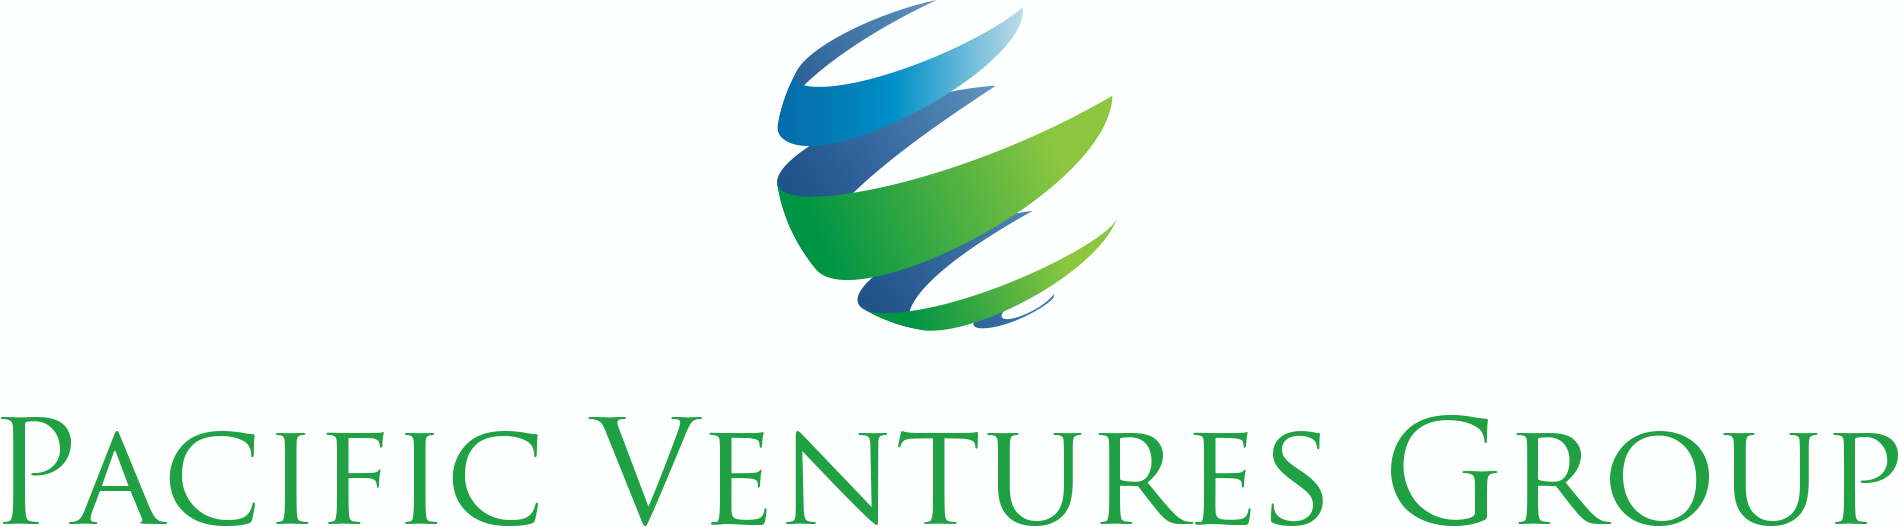 Pacific Ventures Group INC, Wednesday, May 20, 2020, Press release picture